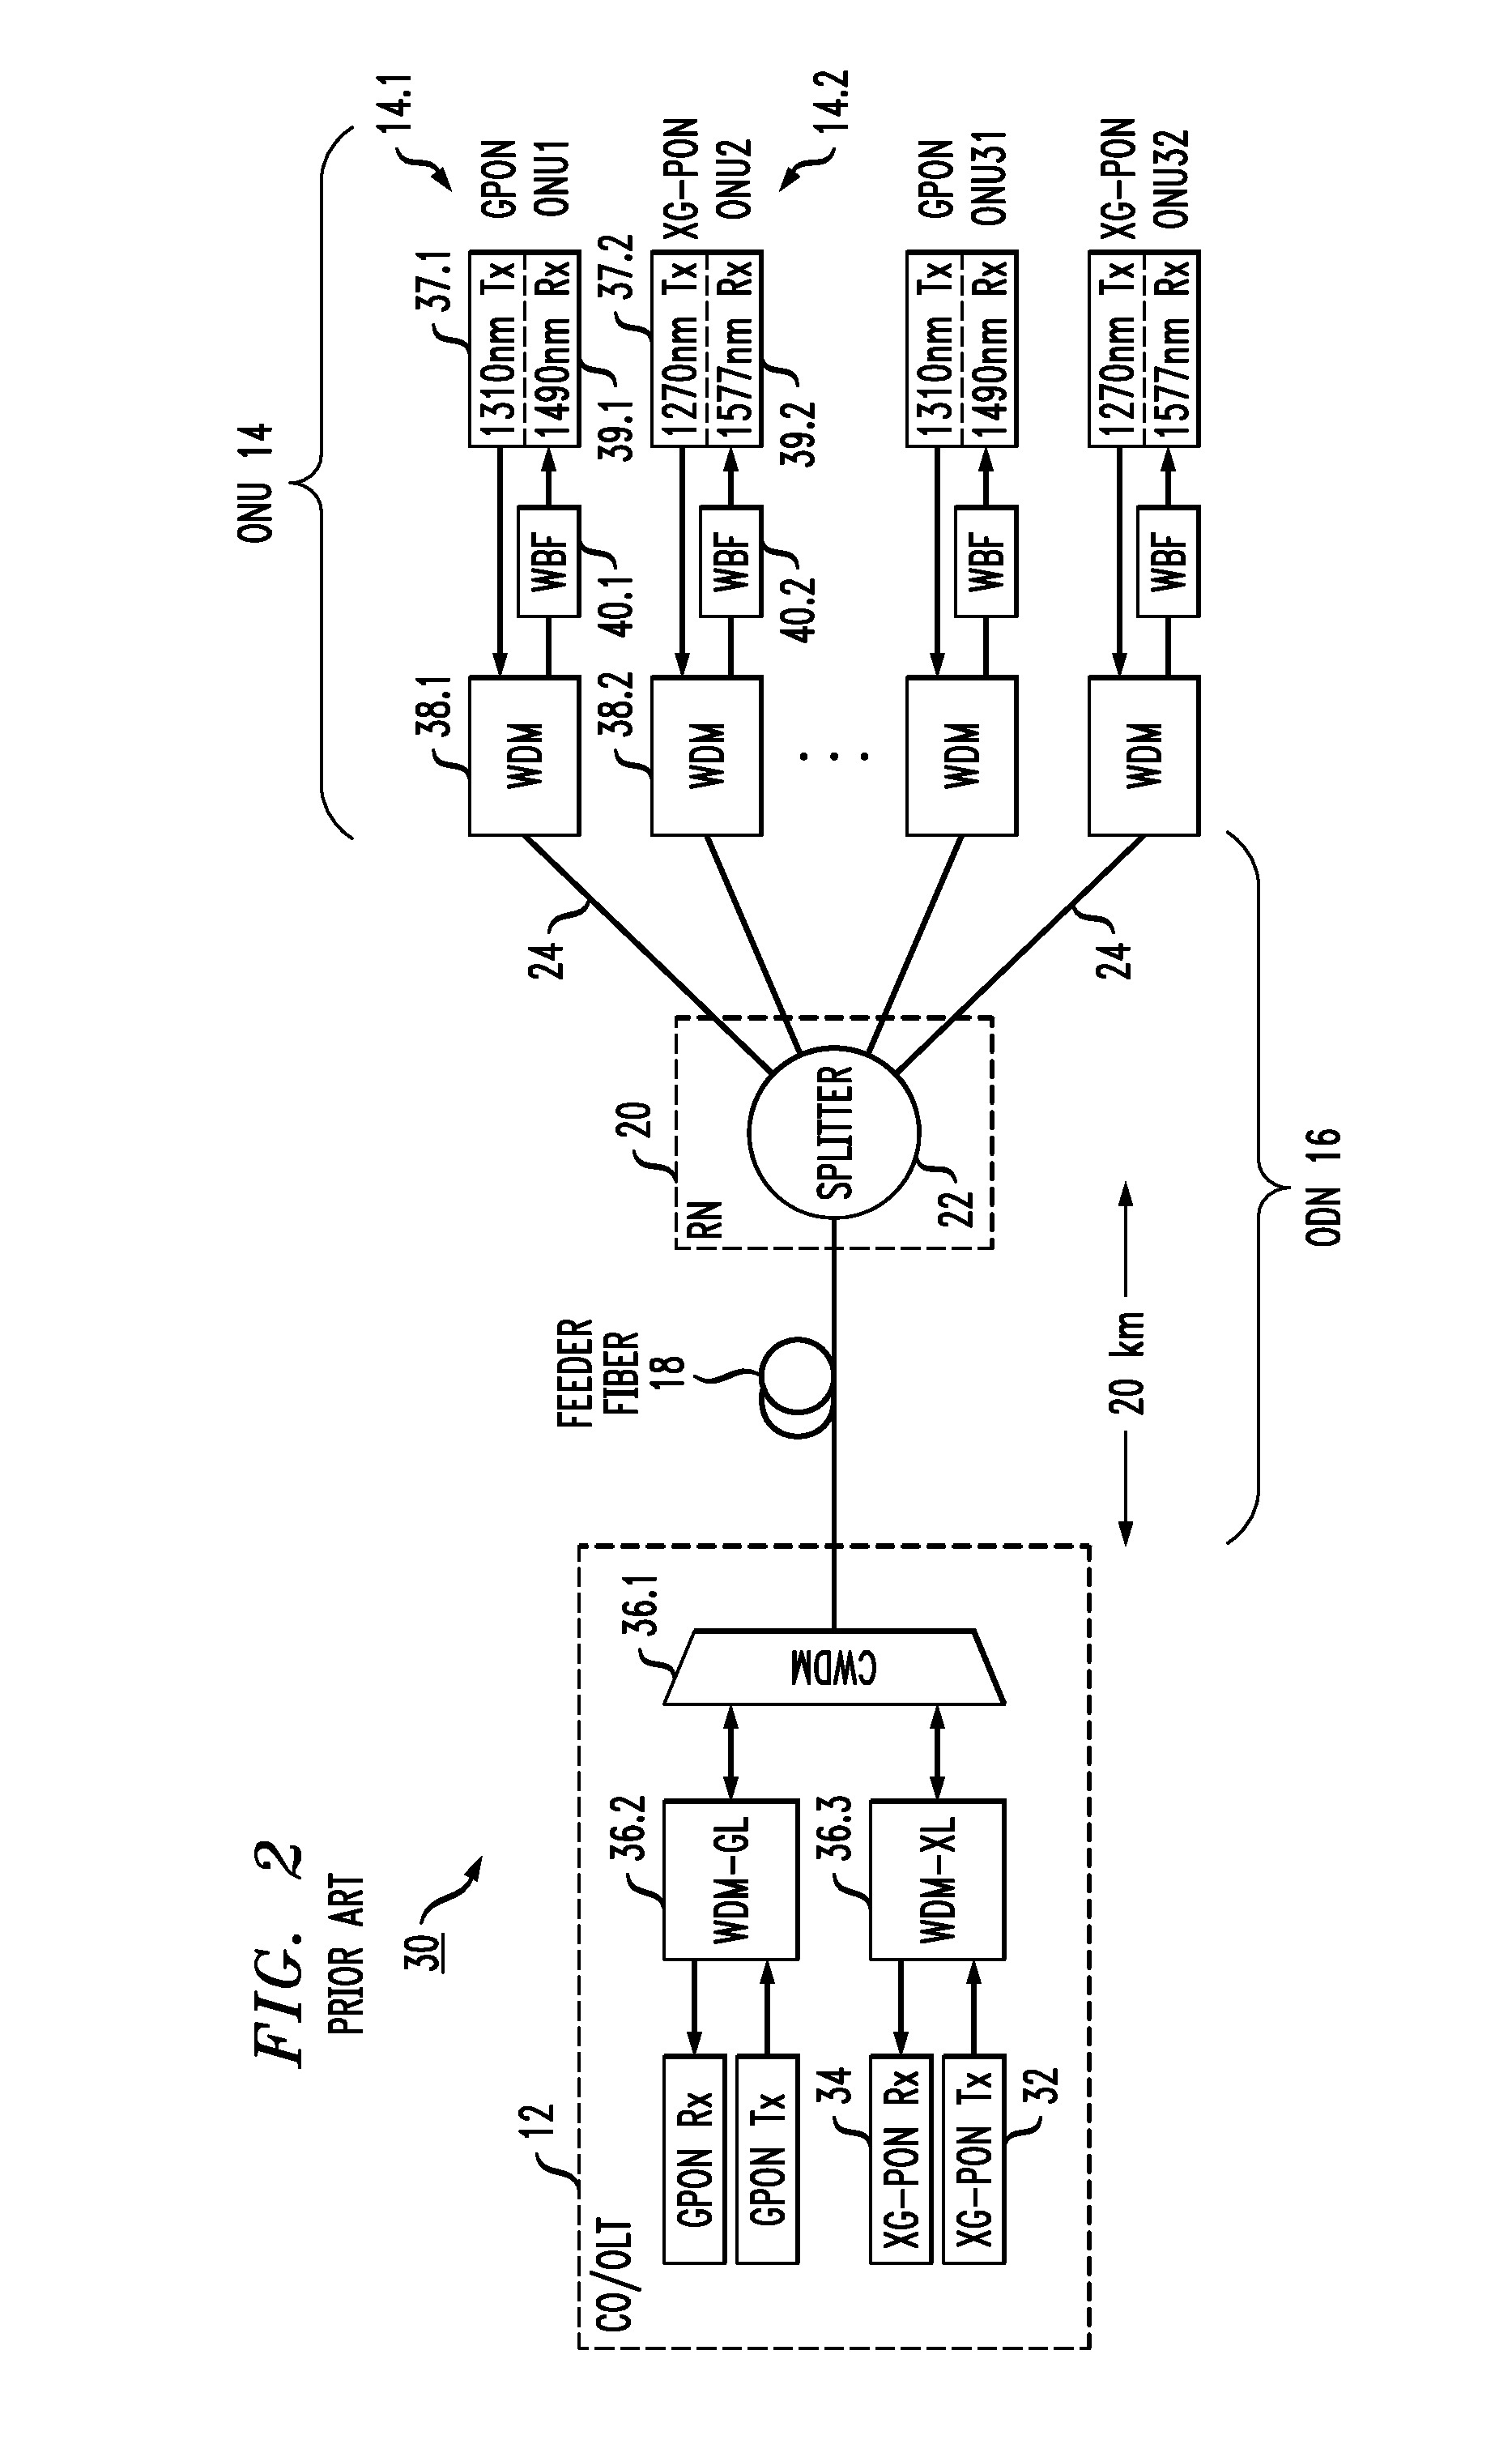 Arrangement for deploying co-existing gpon and xgpon optical communication systems